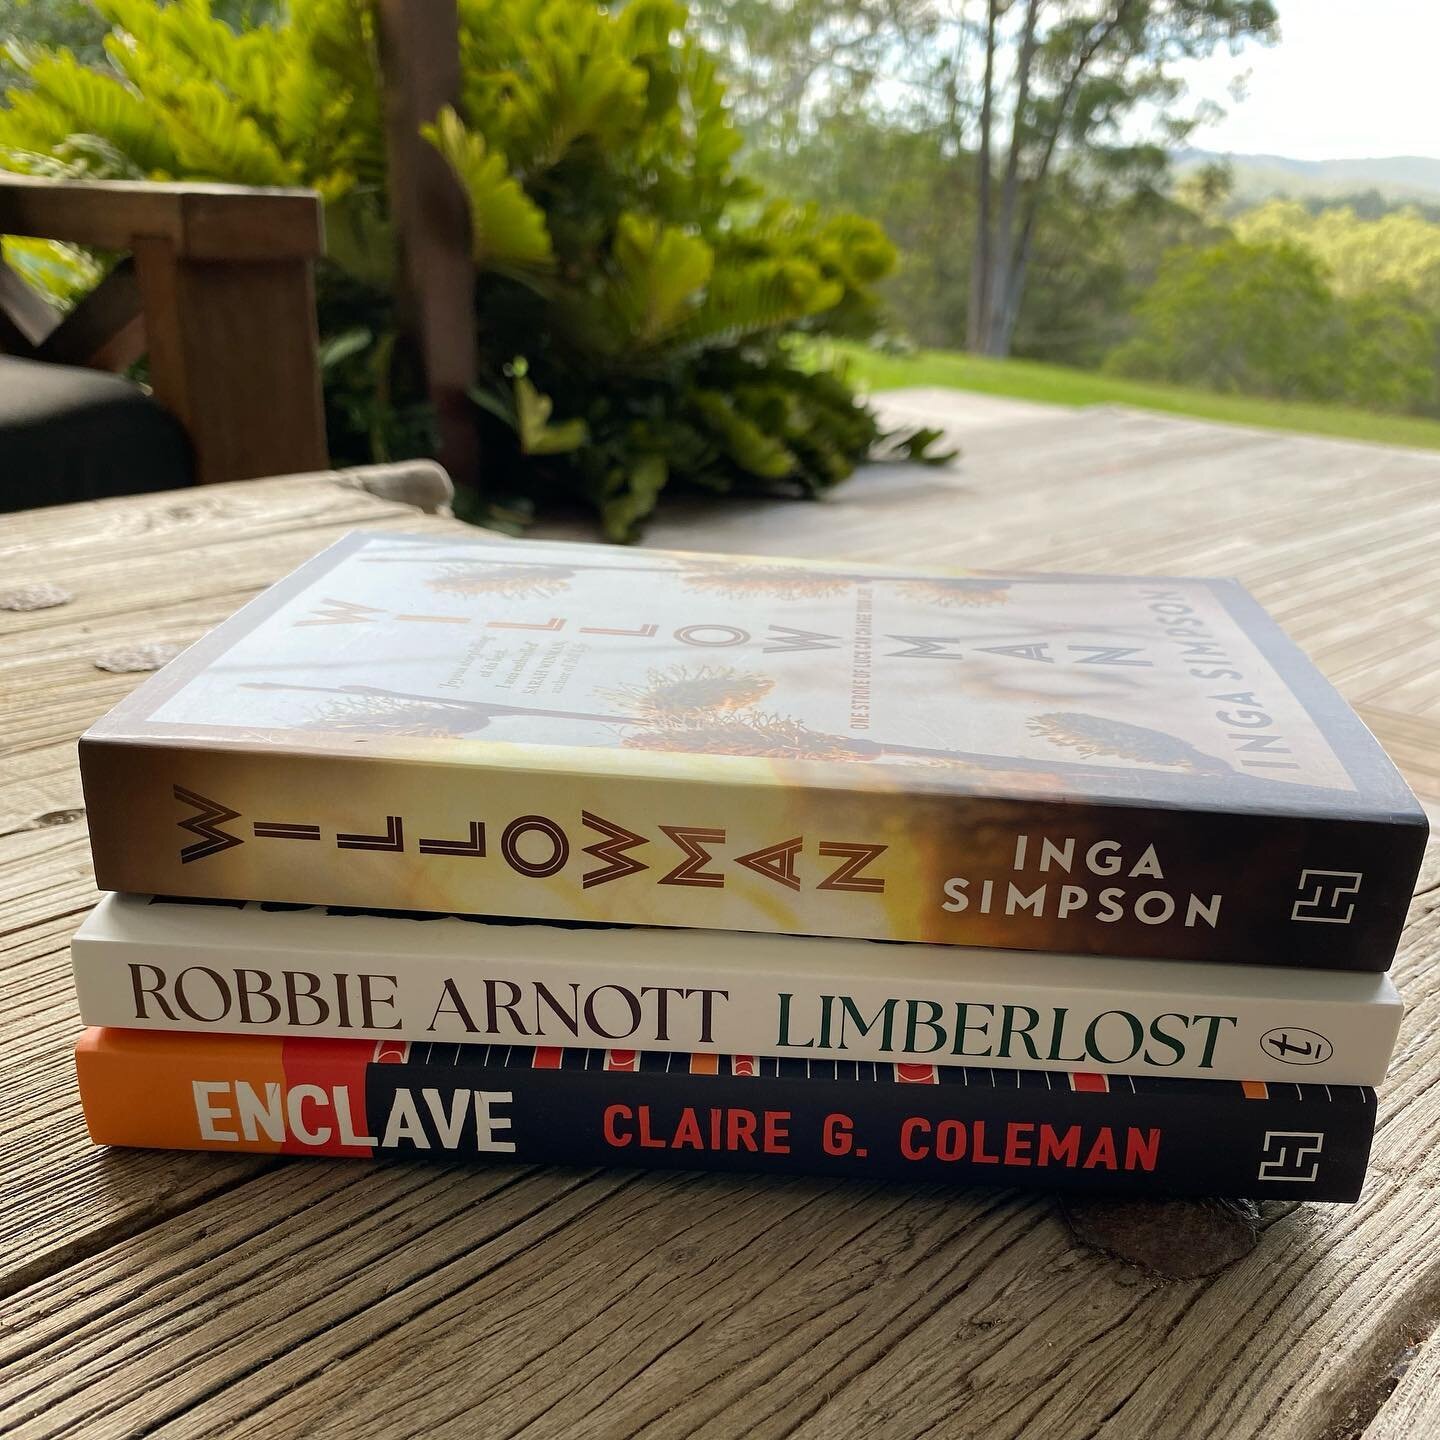 Really looking forward to chatting with the authors of these three fantastic books at Brisbane Writers Festival on Sunday 14 May at 2:30pm. We&rsquo;ll be talking about &lsquo;Writing the Landscape&rsquo;, plus so much more with these unique and comp